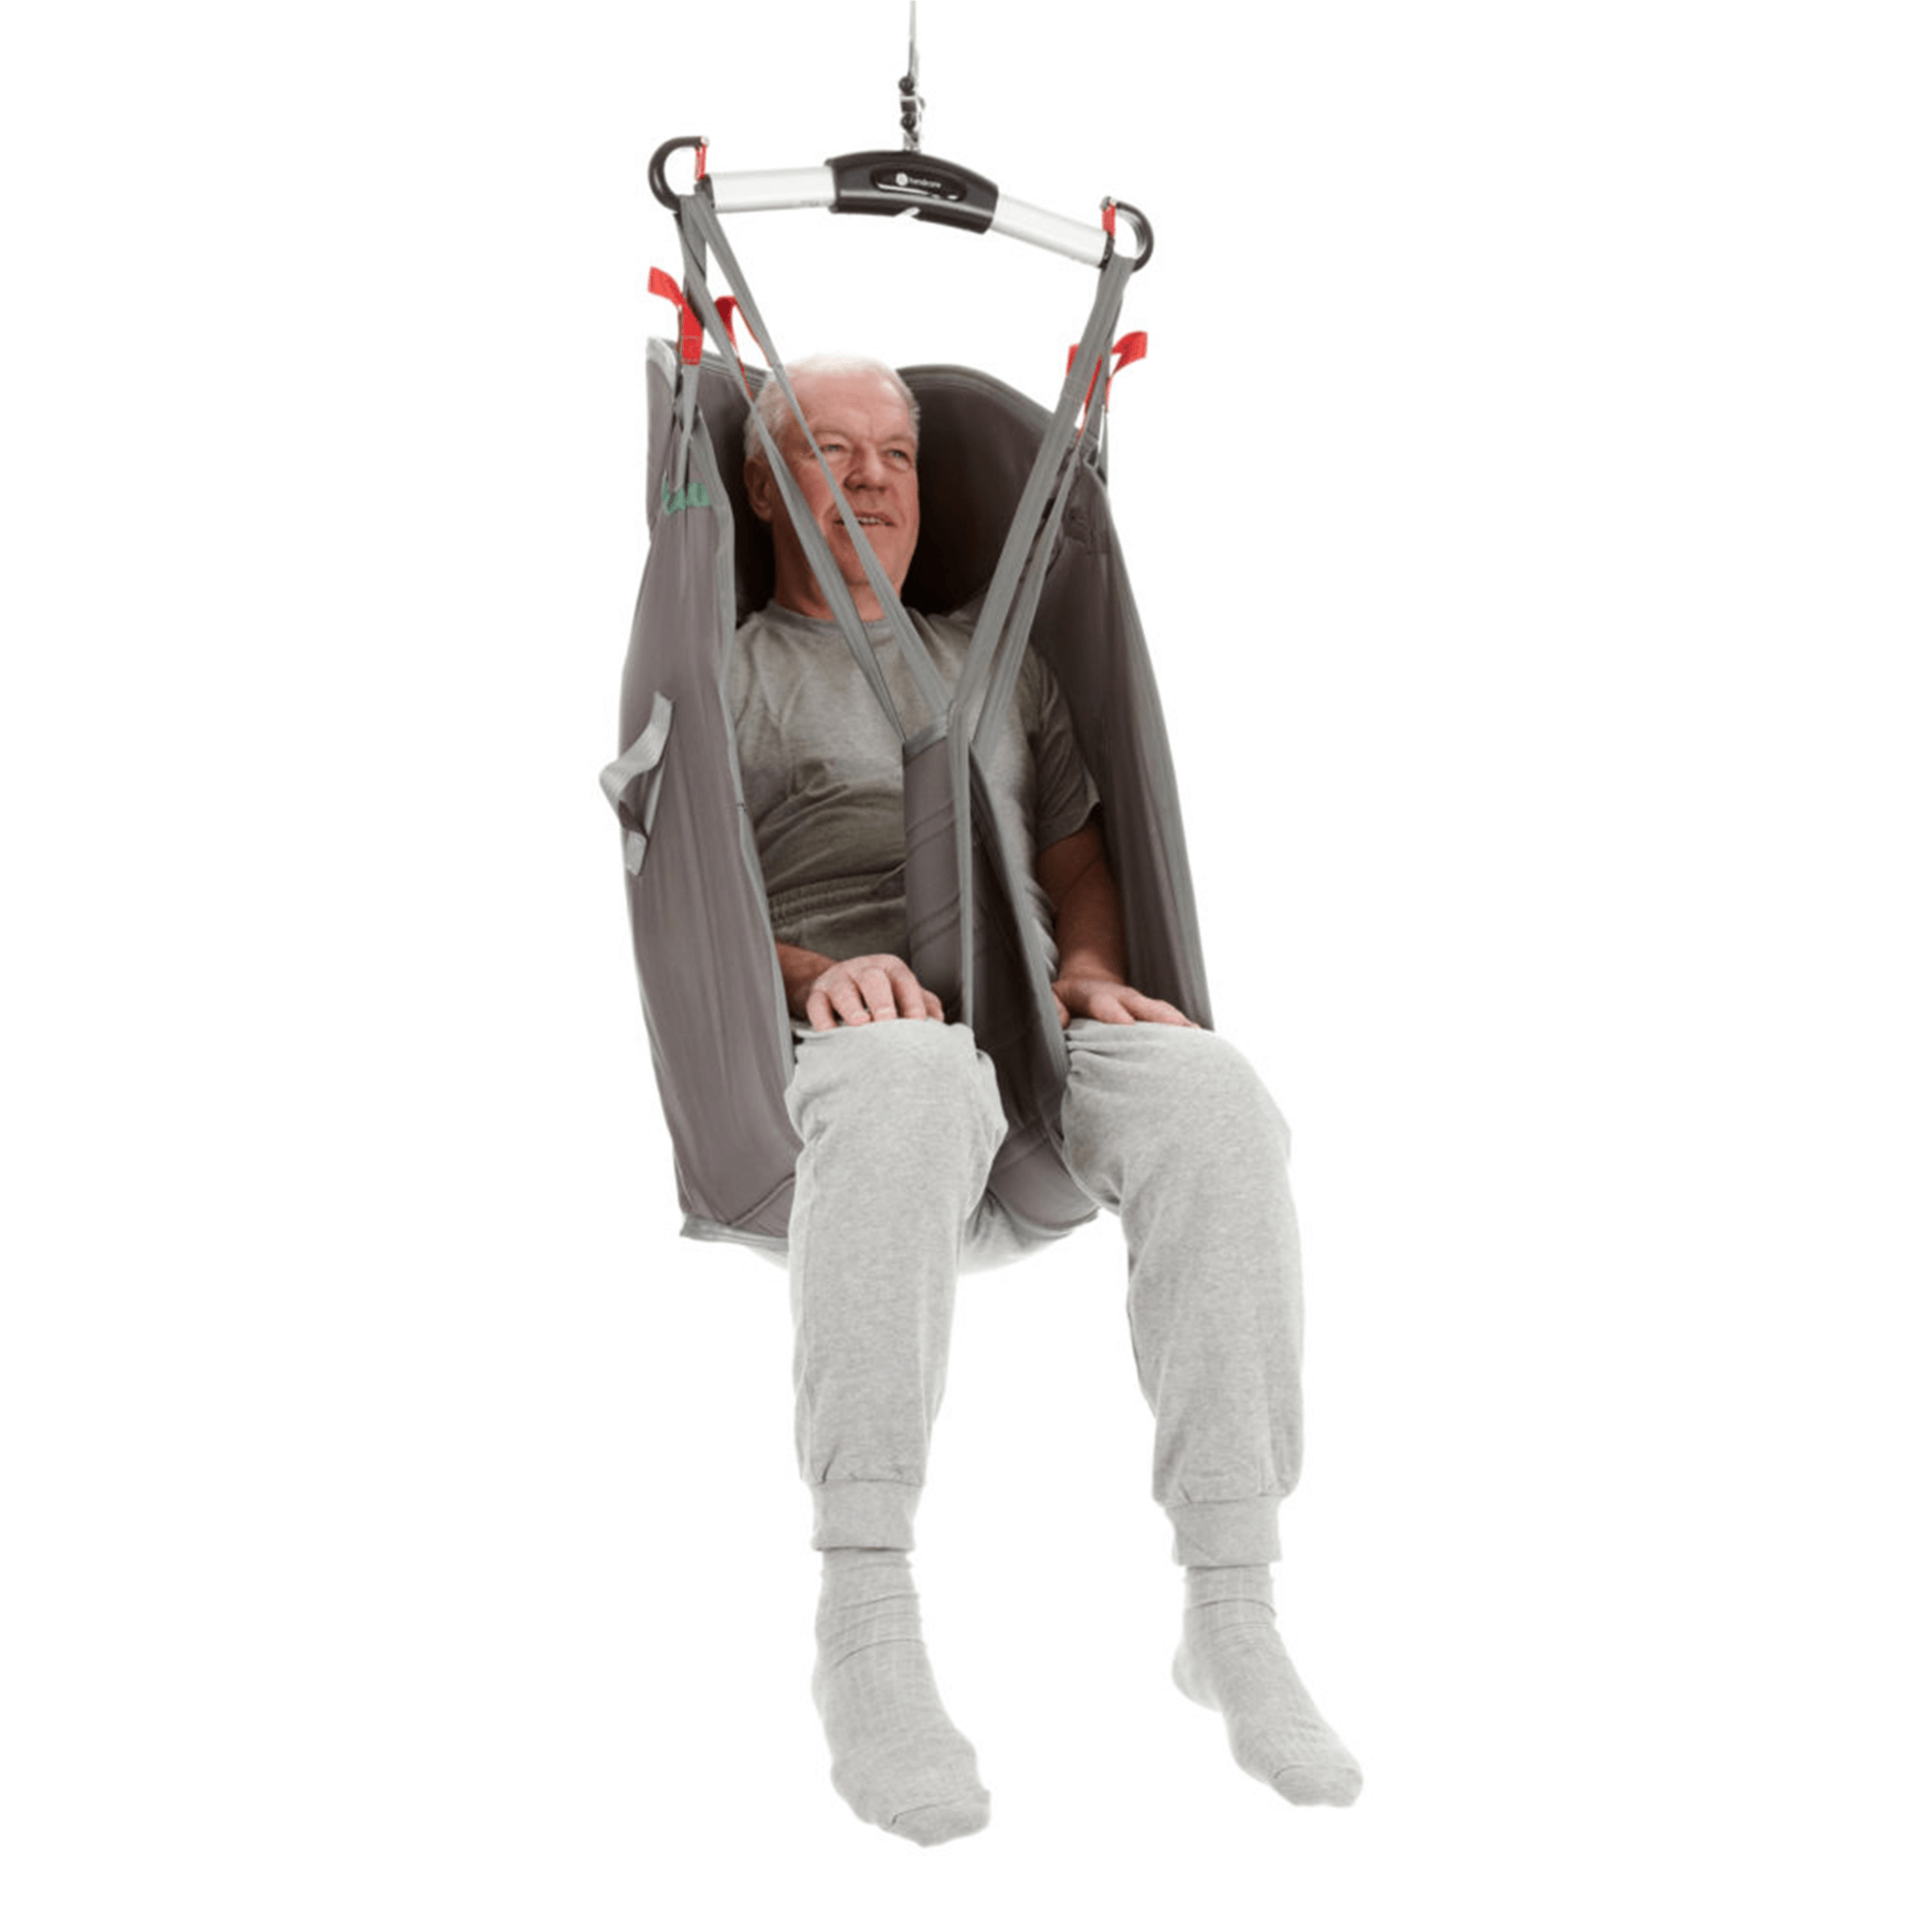 Upright Seated Sling - Universal Patient Lift Sling for Lifts for Home Use - Transfer Safely with Patient Lifter - Compatible with Hoyer Lift - Easy-to-Use